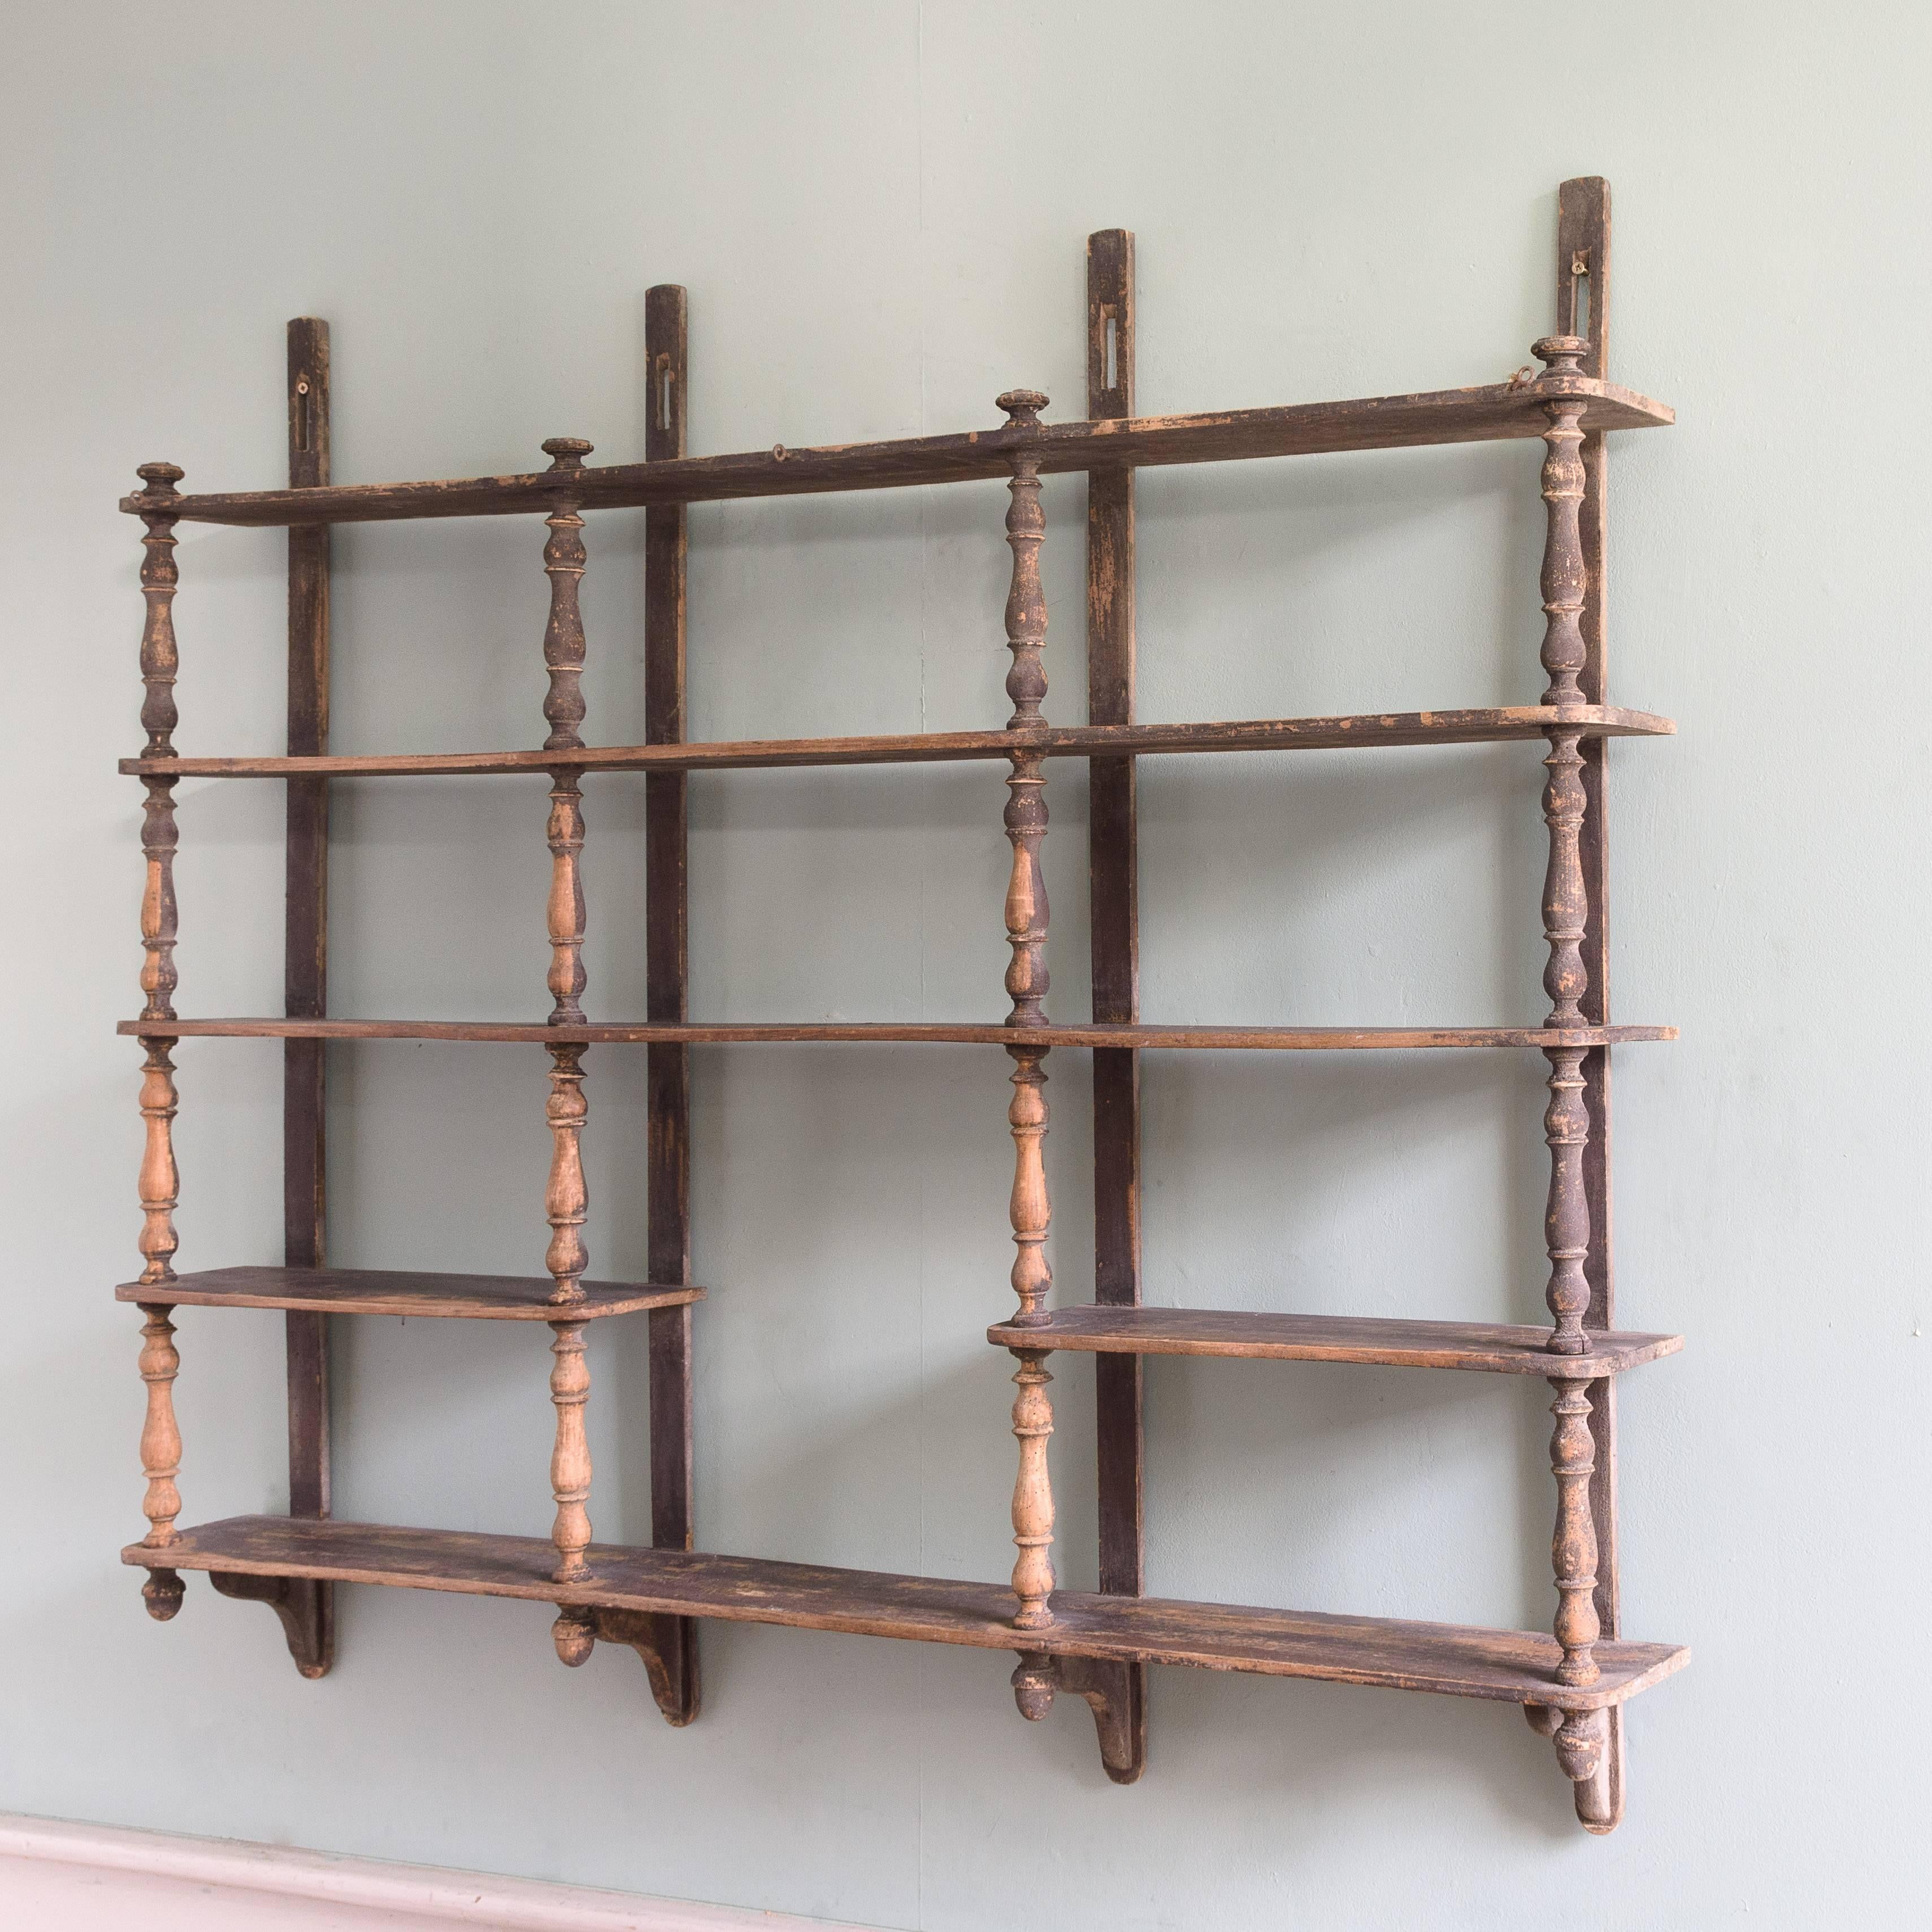 A set of 19th century French wall shelves, with turned upright supports, retaining historic surface finish, circa 1850-1870.